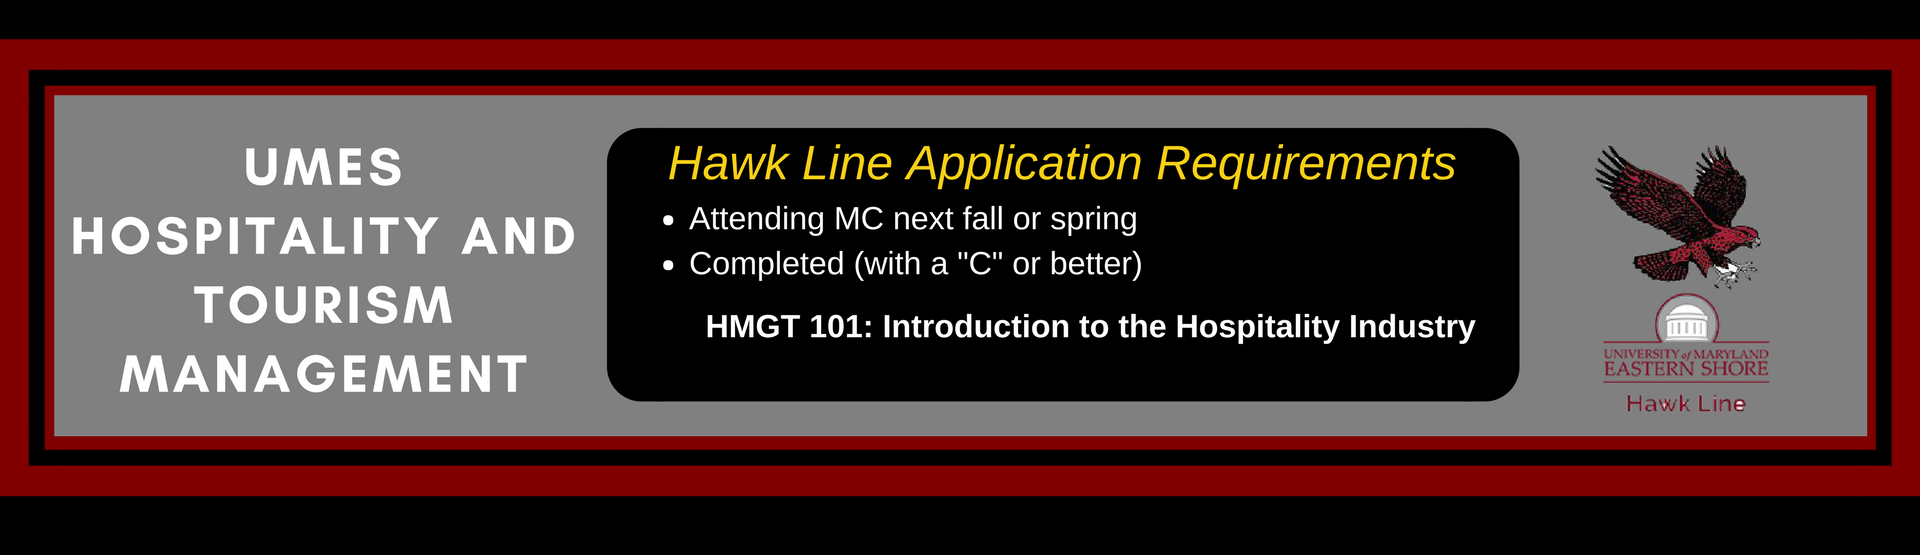 UMES Hospitality and Tourism Management Hawk Line Application Requirements: Attending MC next semester and completed HMGT 101.